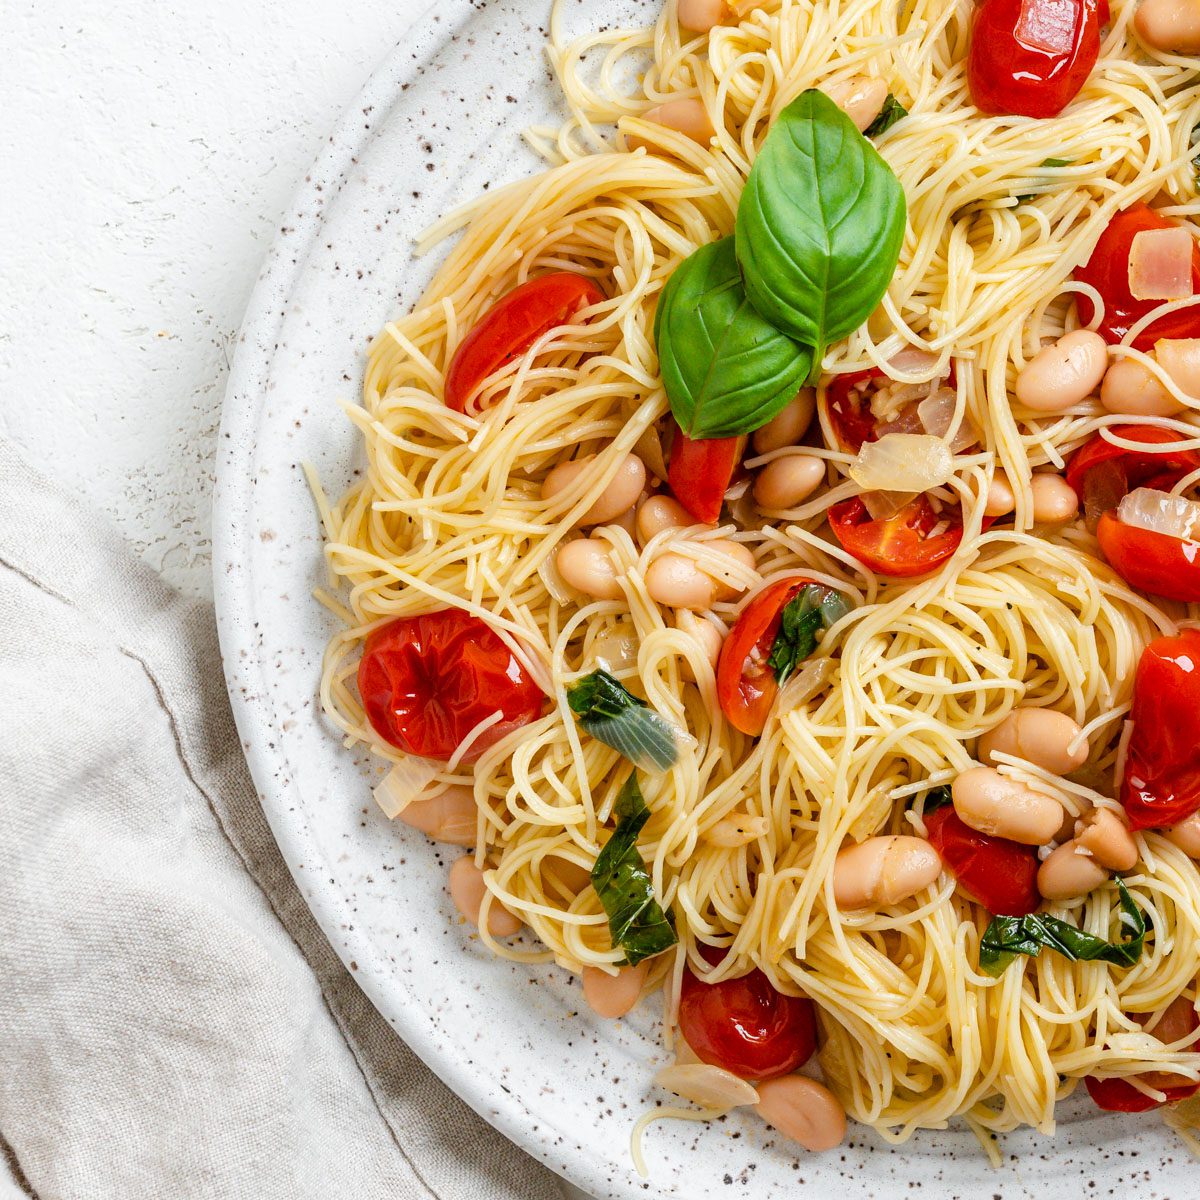 Tuscan White Bean Pasta [With Blistered Cherry Tomatoes] - Food Sharing  Vegan